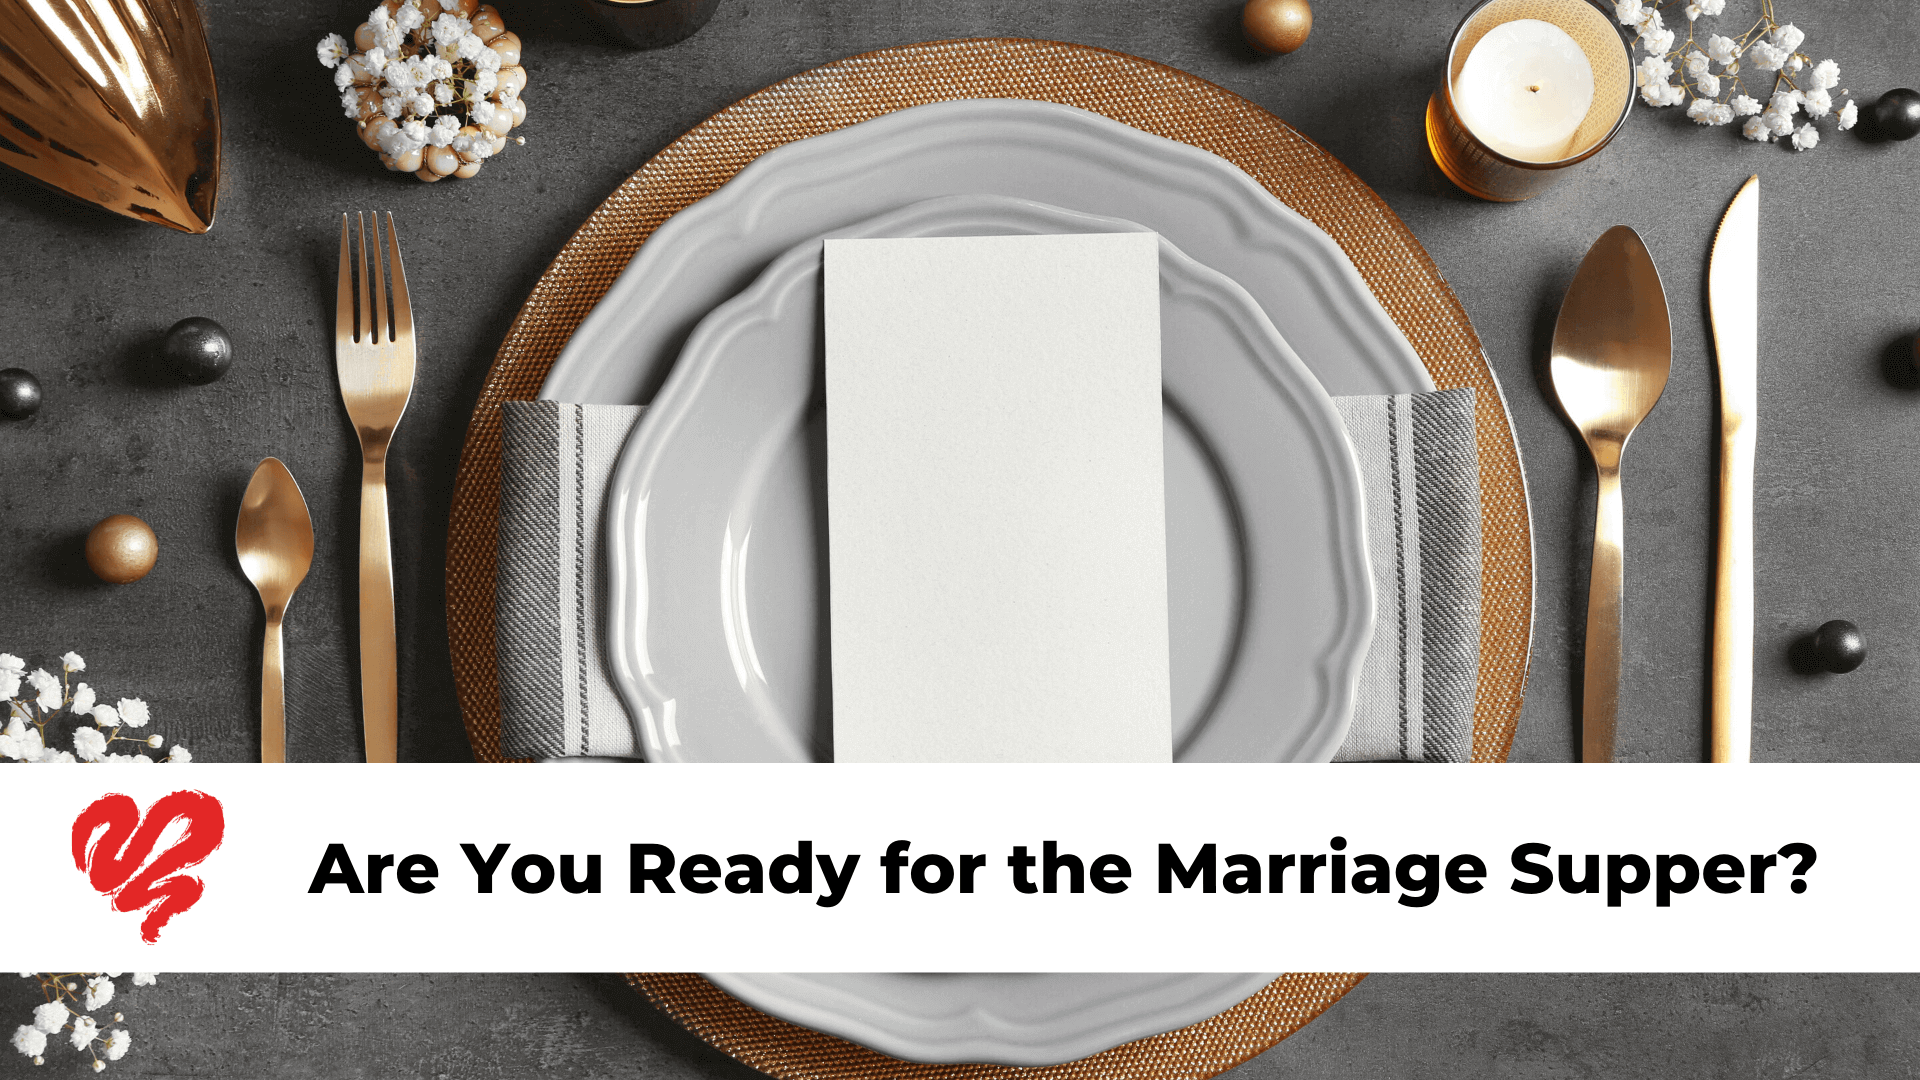 Are You Ready for the Marriage Supper March 22